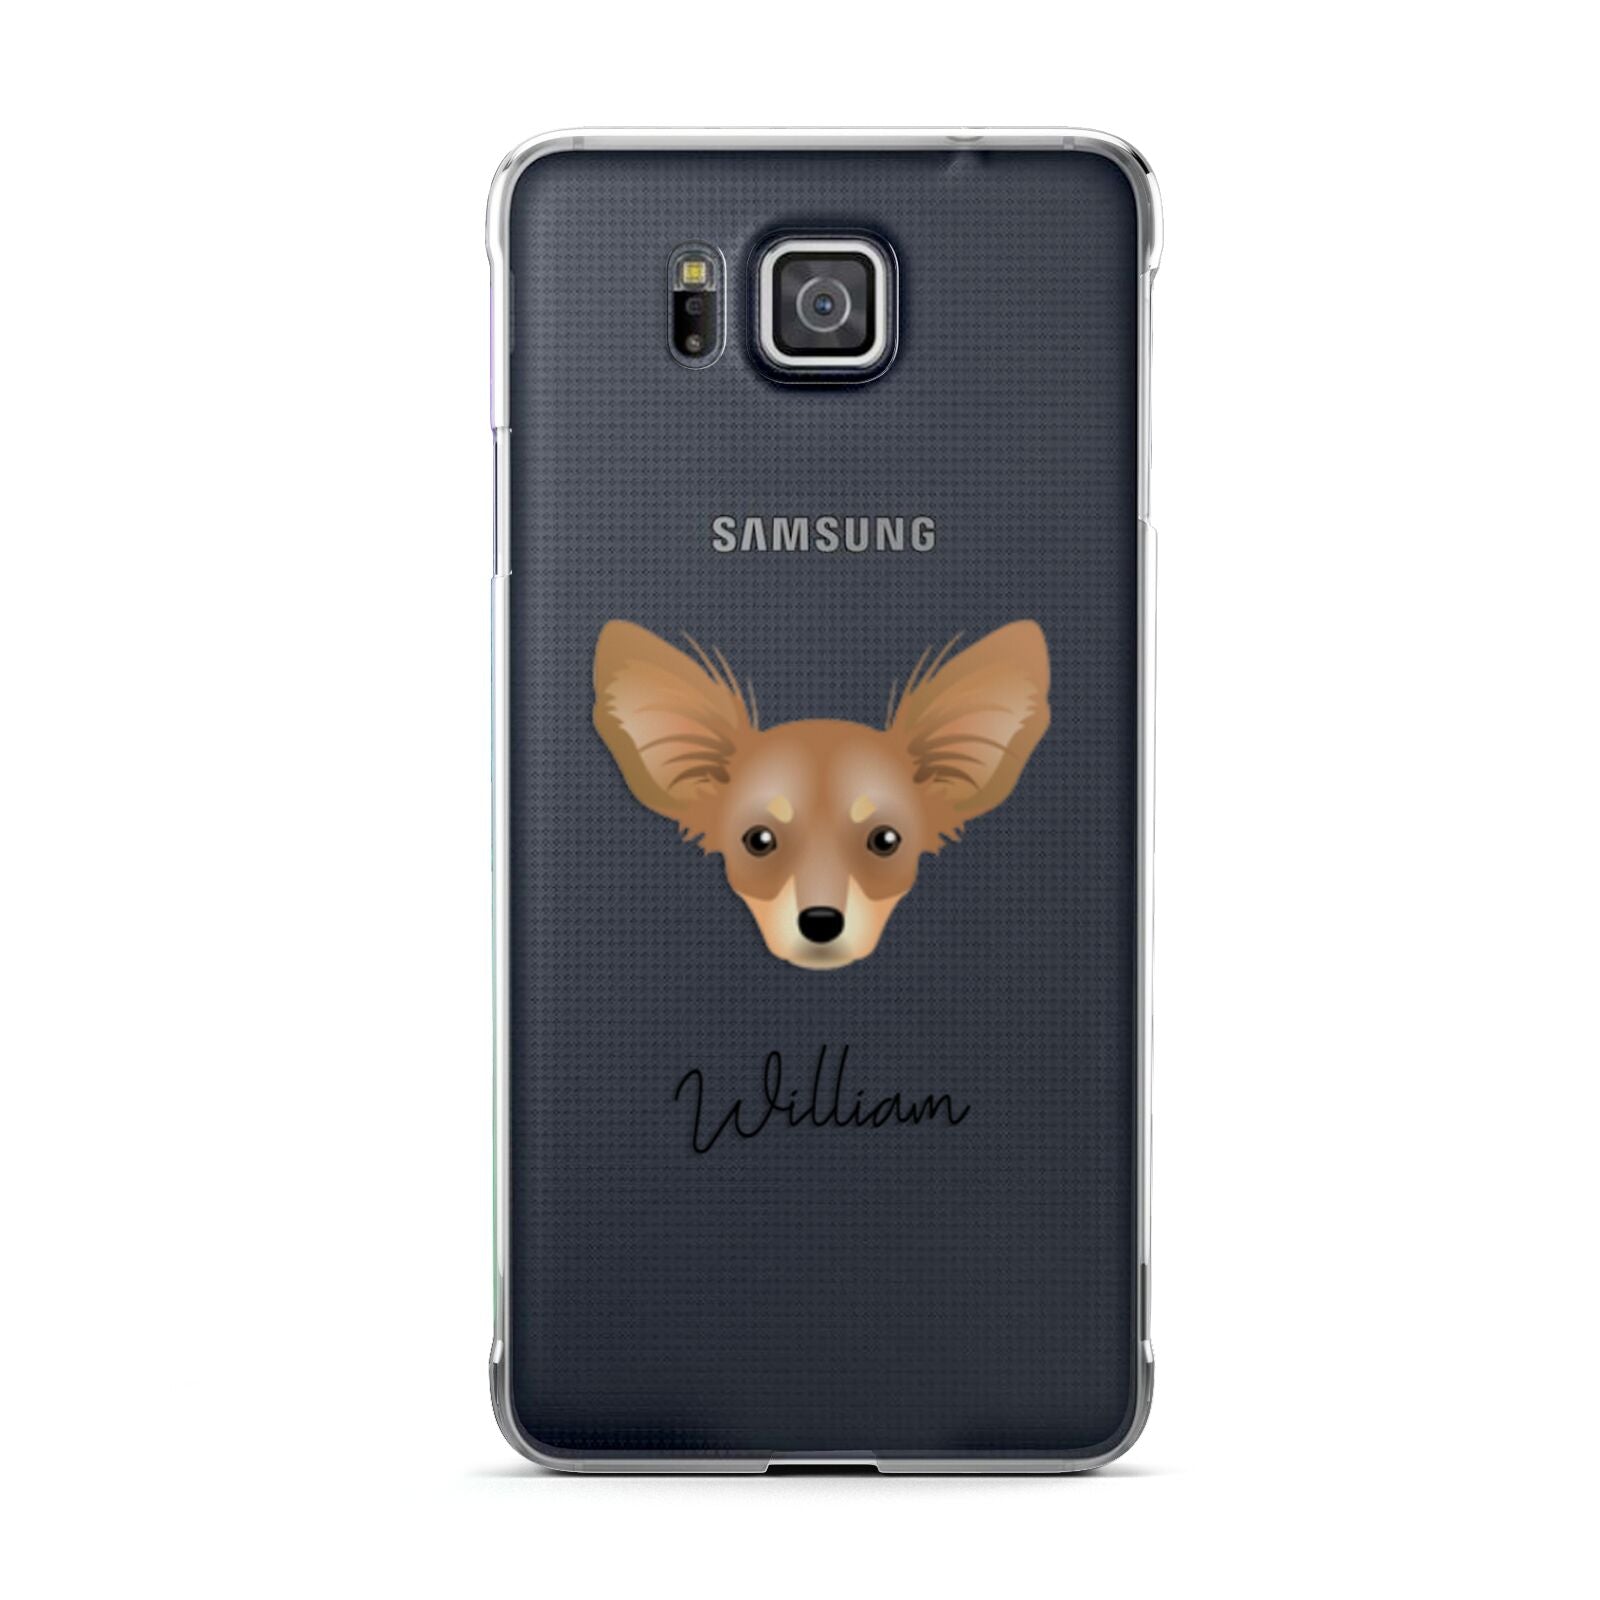 Russian Toy Personalised Samsung Galaxy Alpha Case